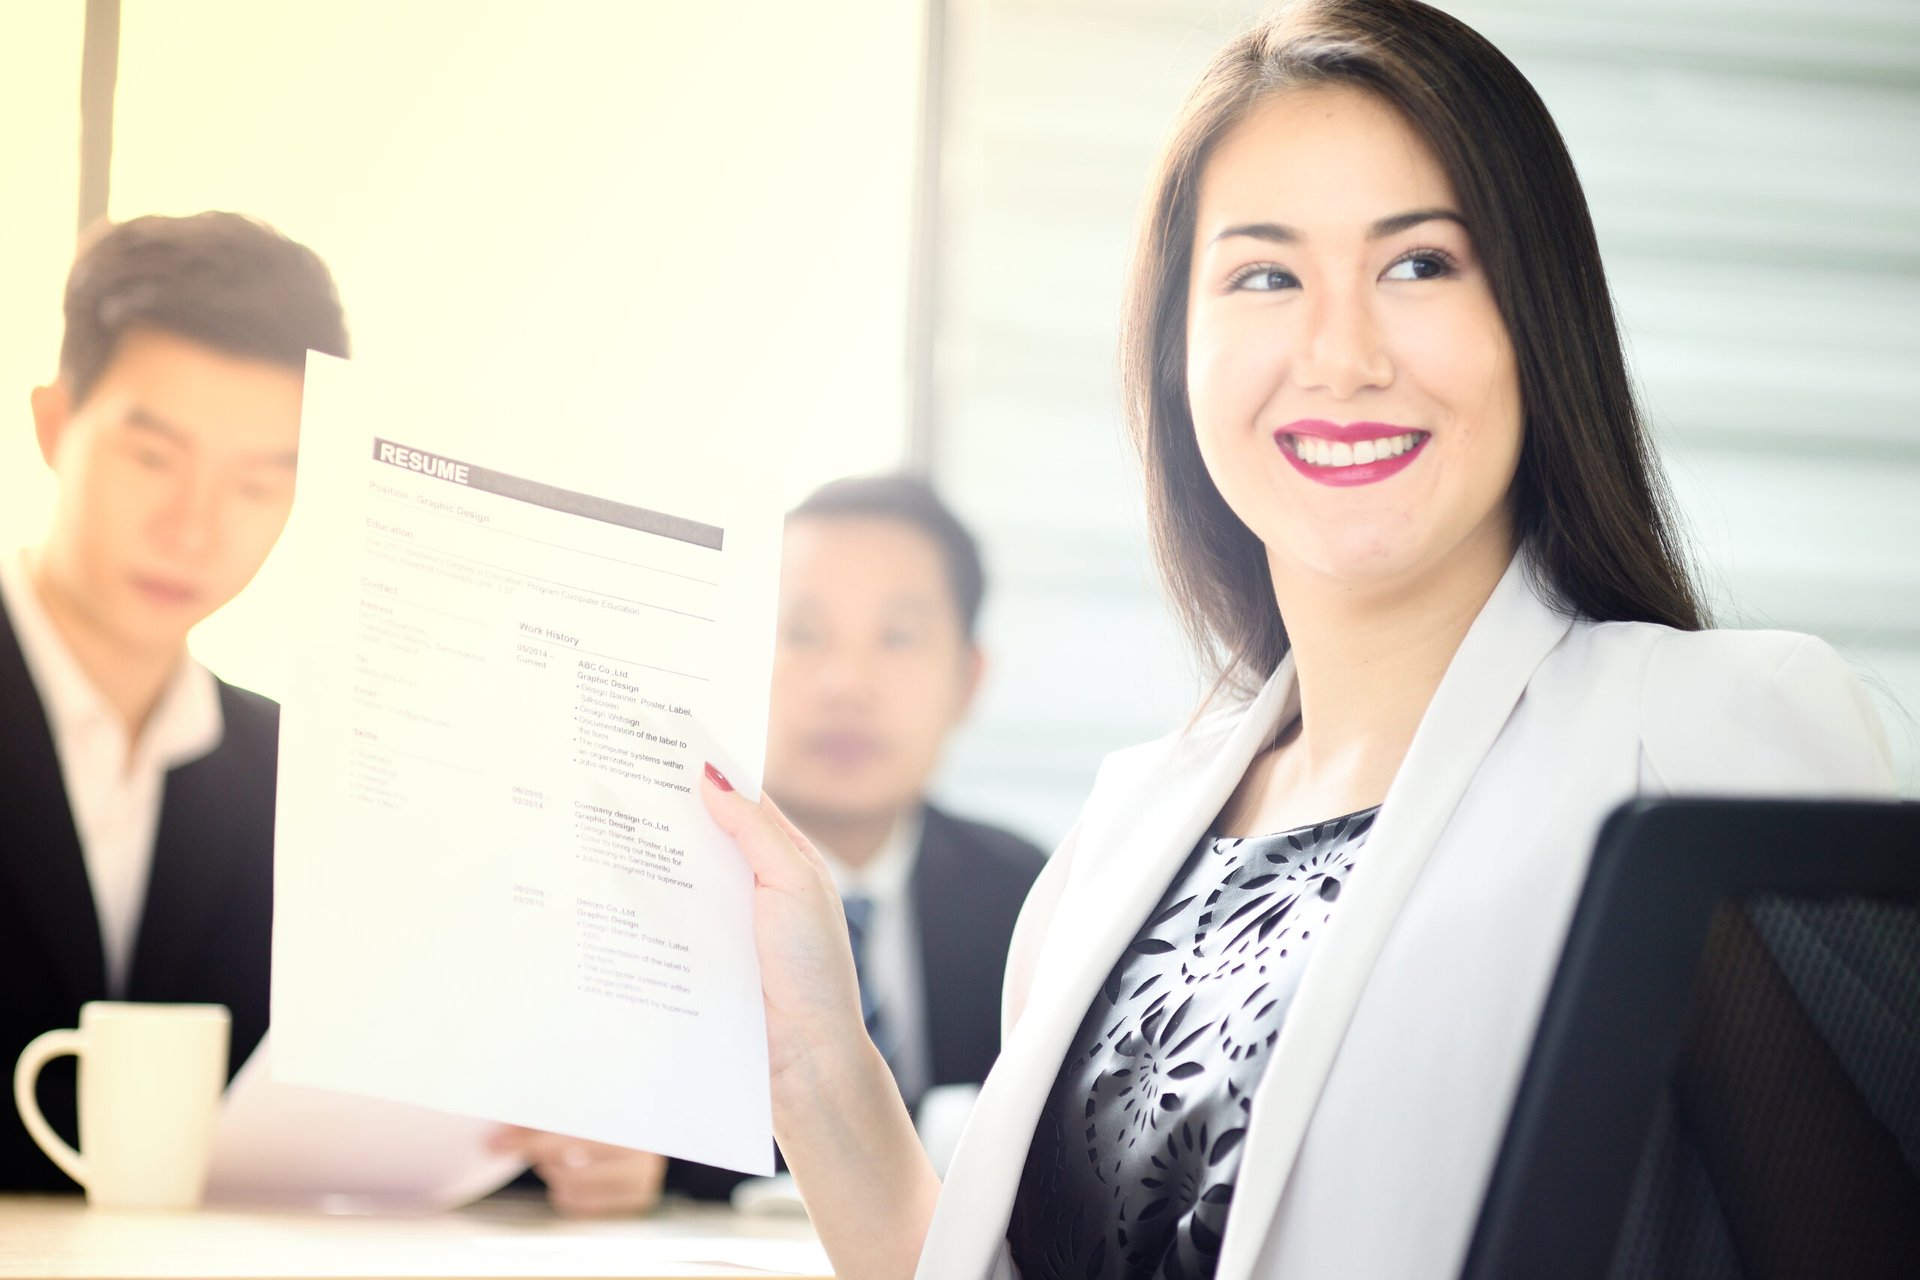 Employer showing resume to someone and smiling